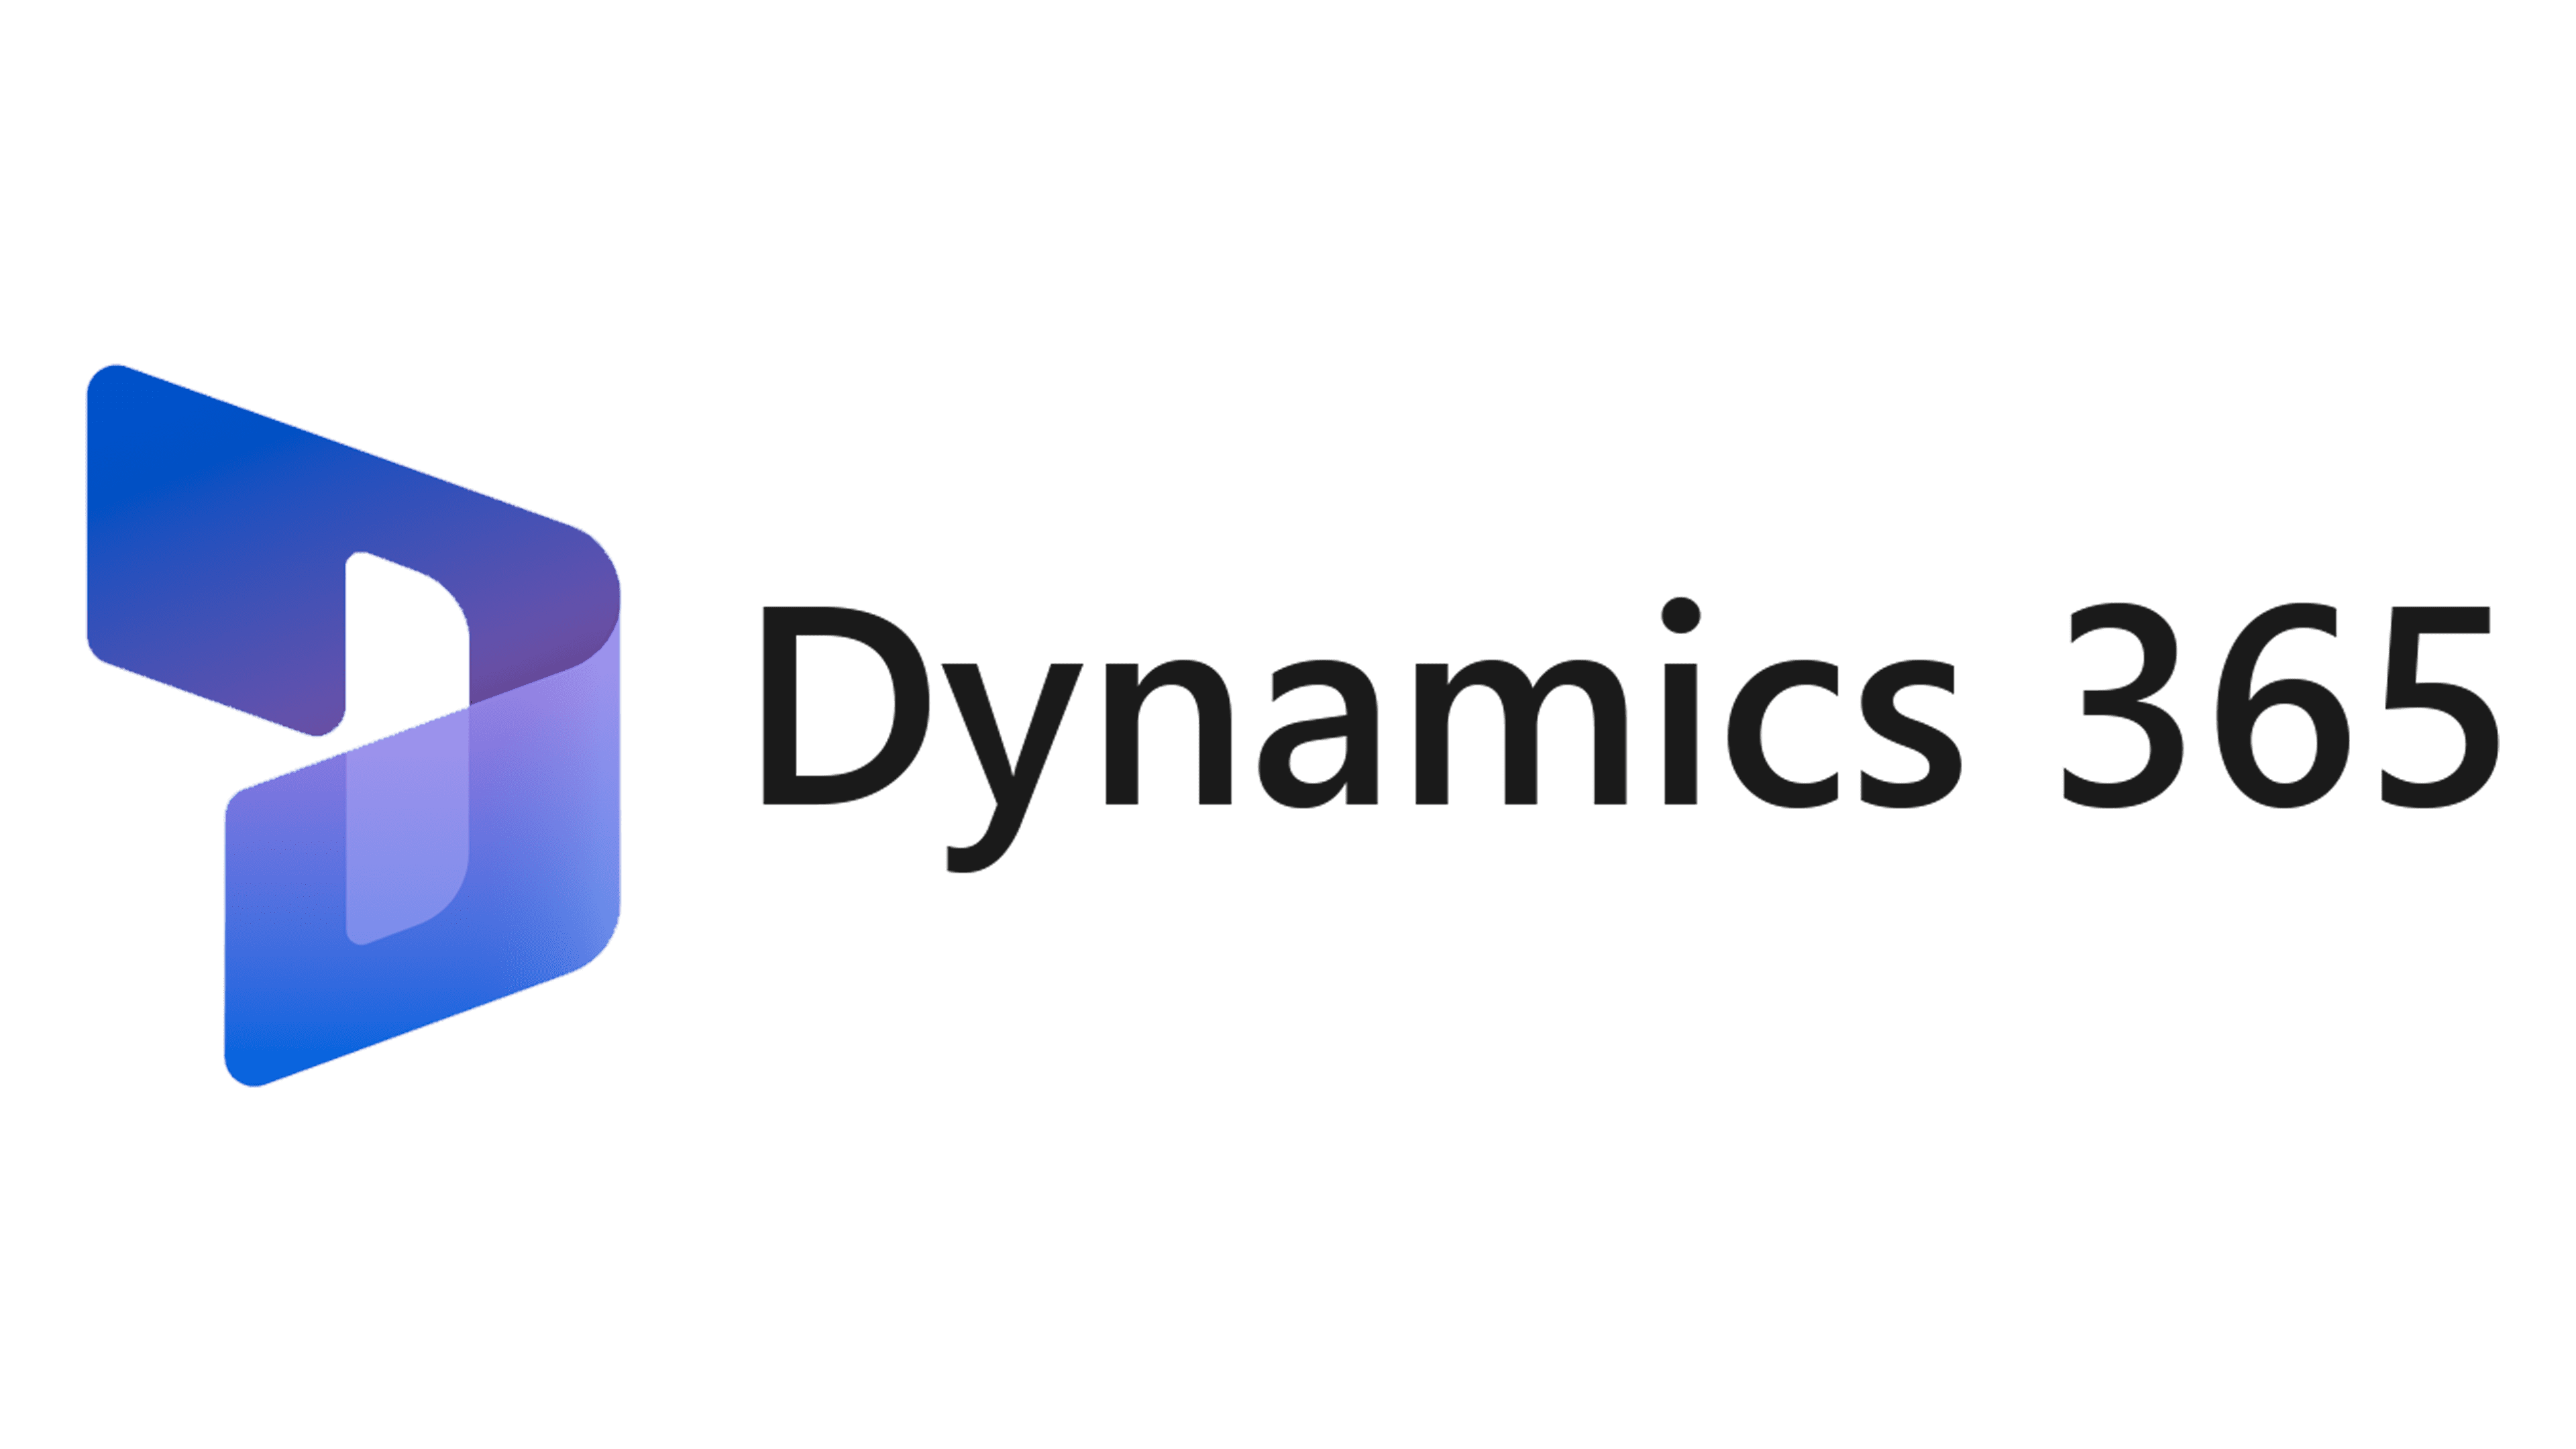 Click here to log into Dynamics365